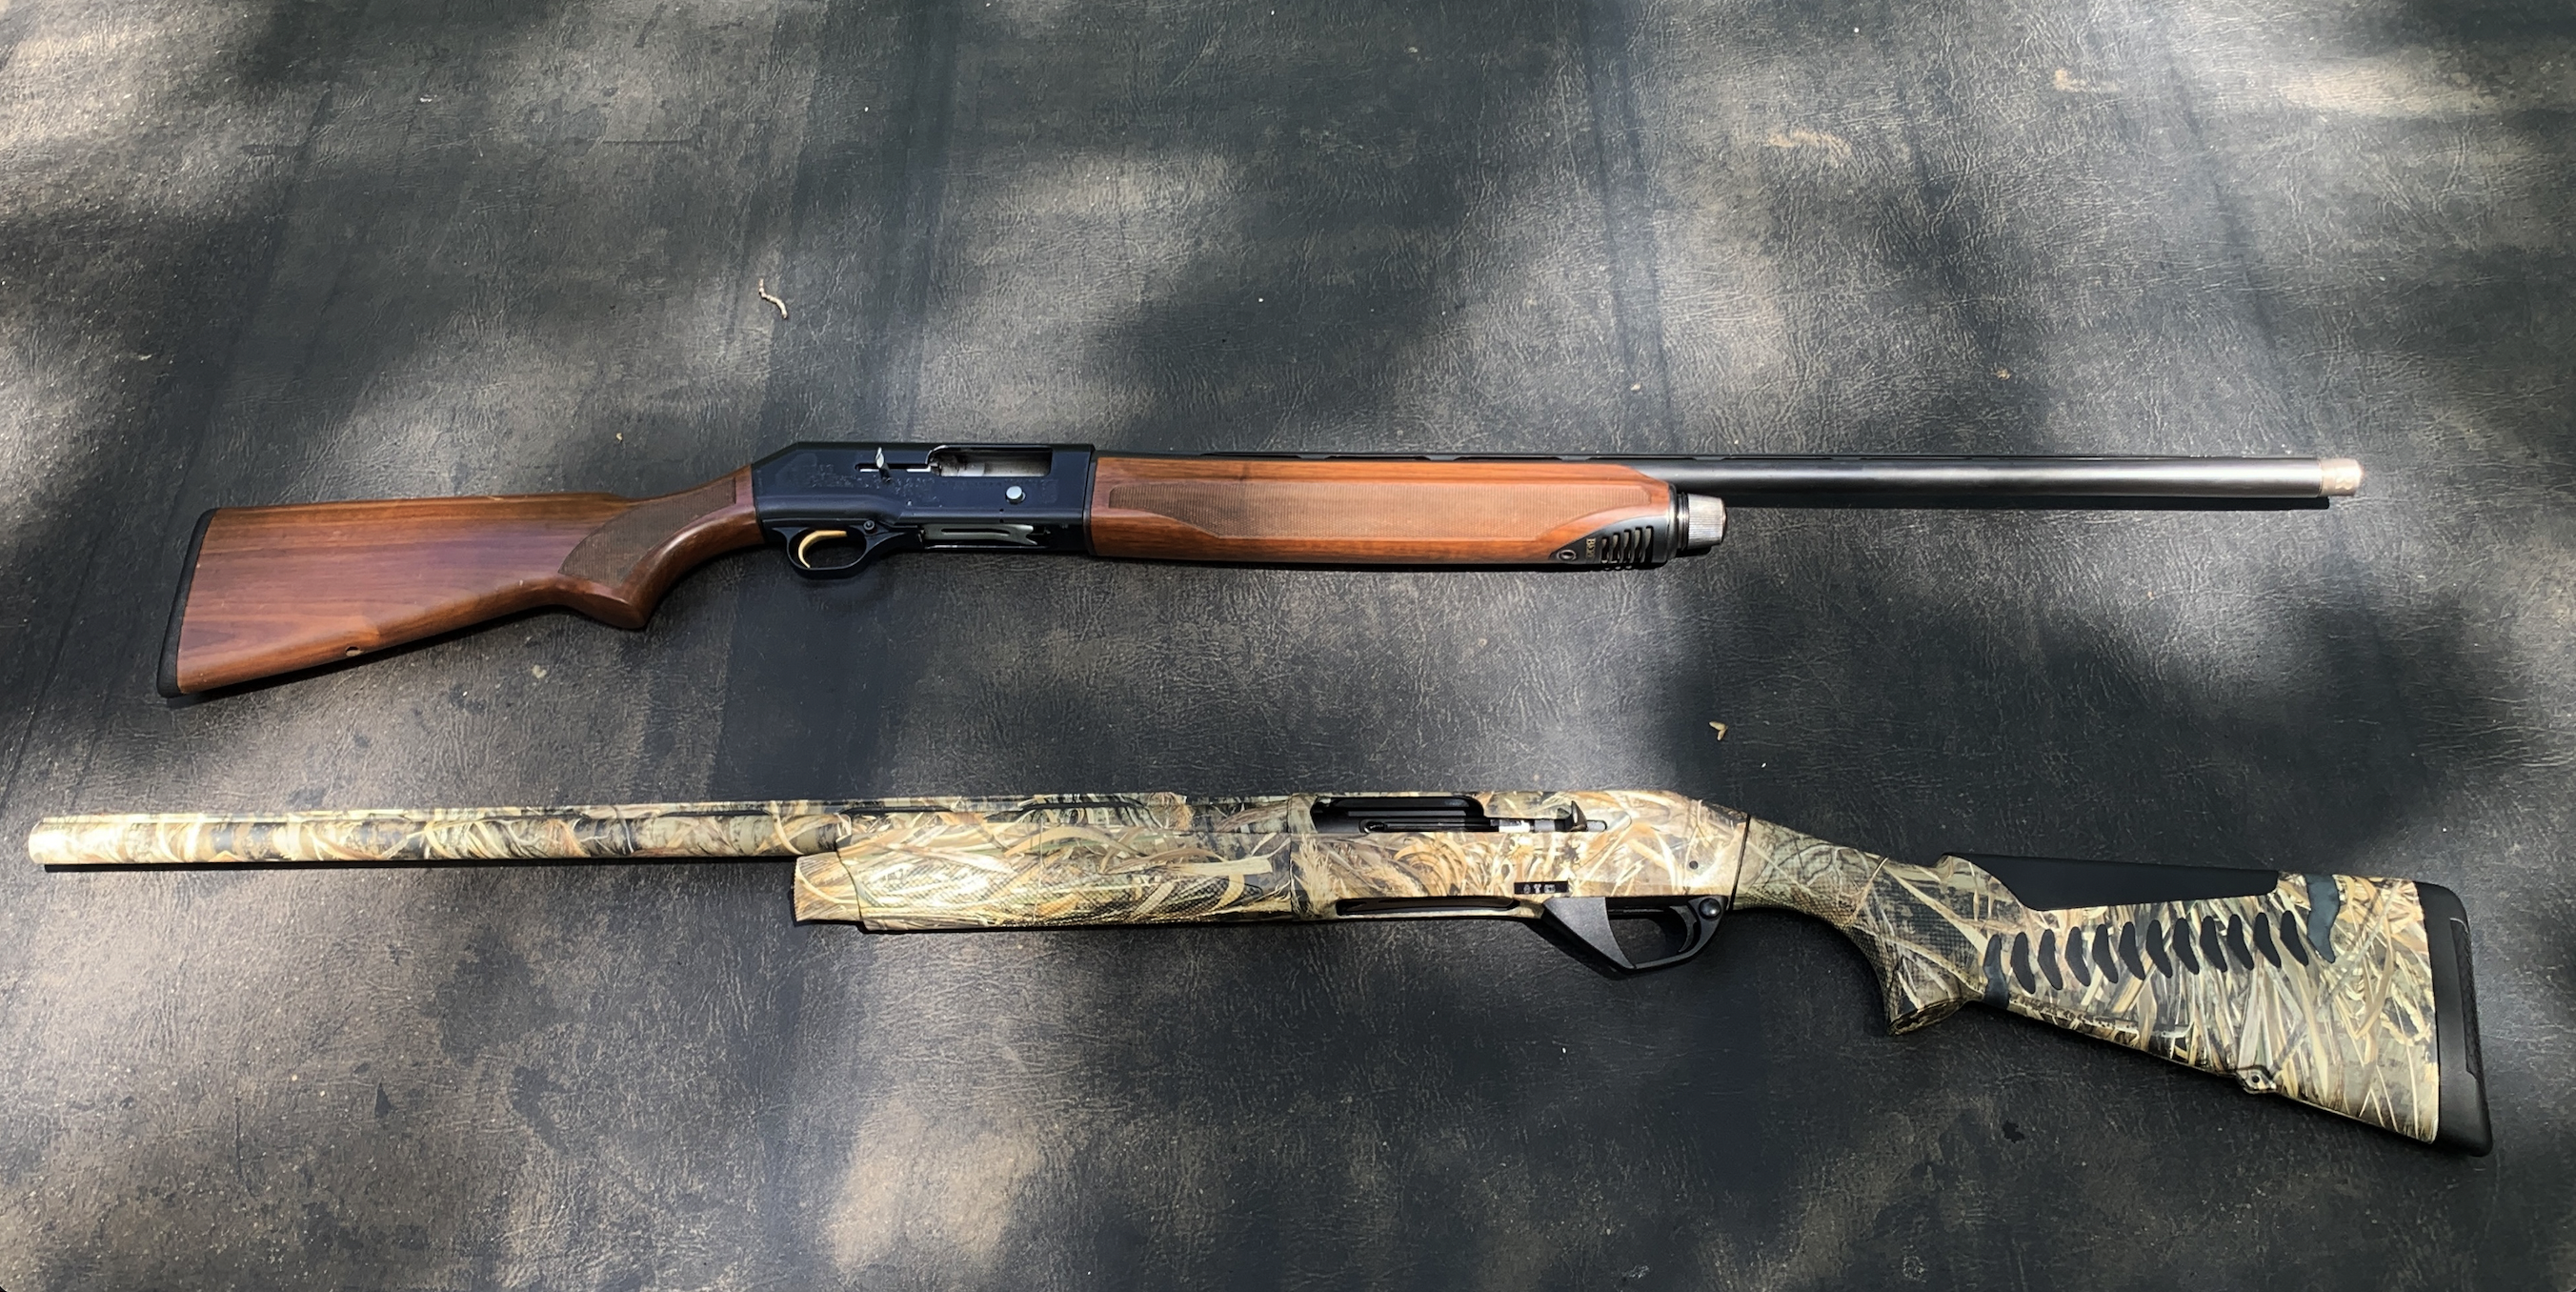 The Beretta A390 and SBE3 left eject.